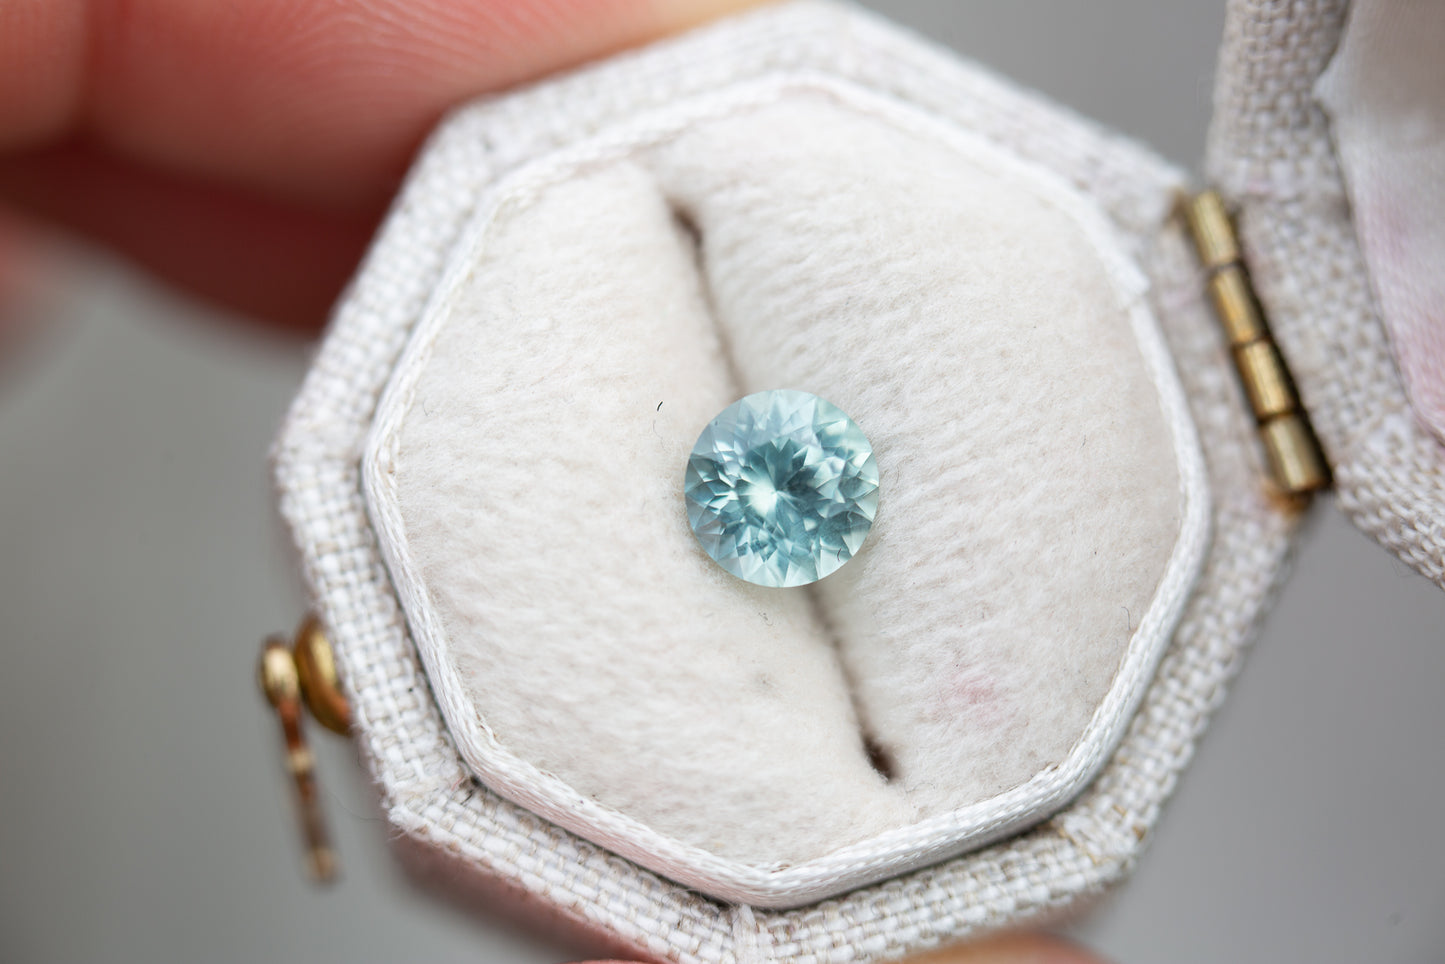 Load image into Gallery viewer, 1.02ct round light teal blue sapphire
